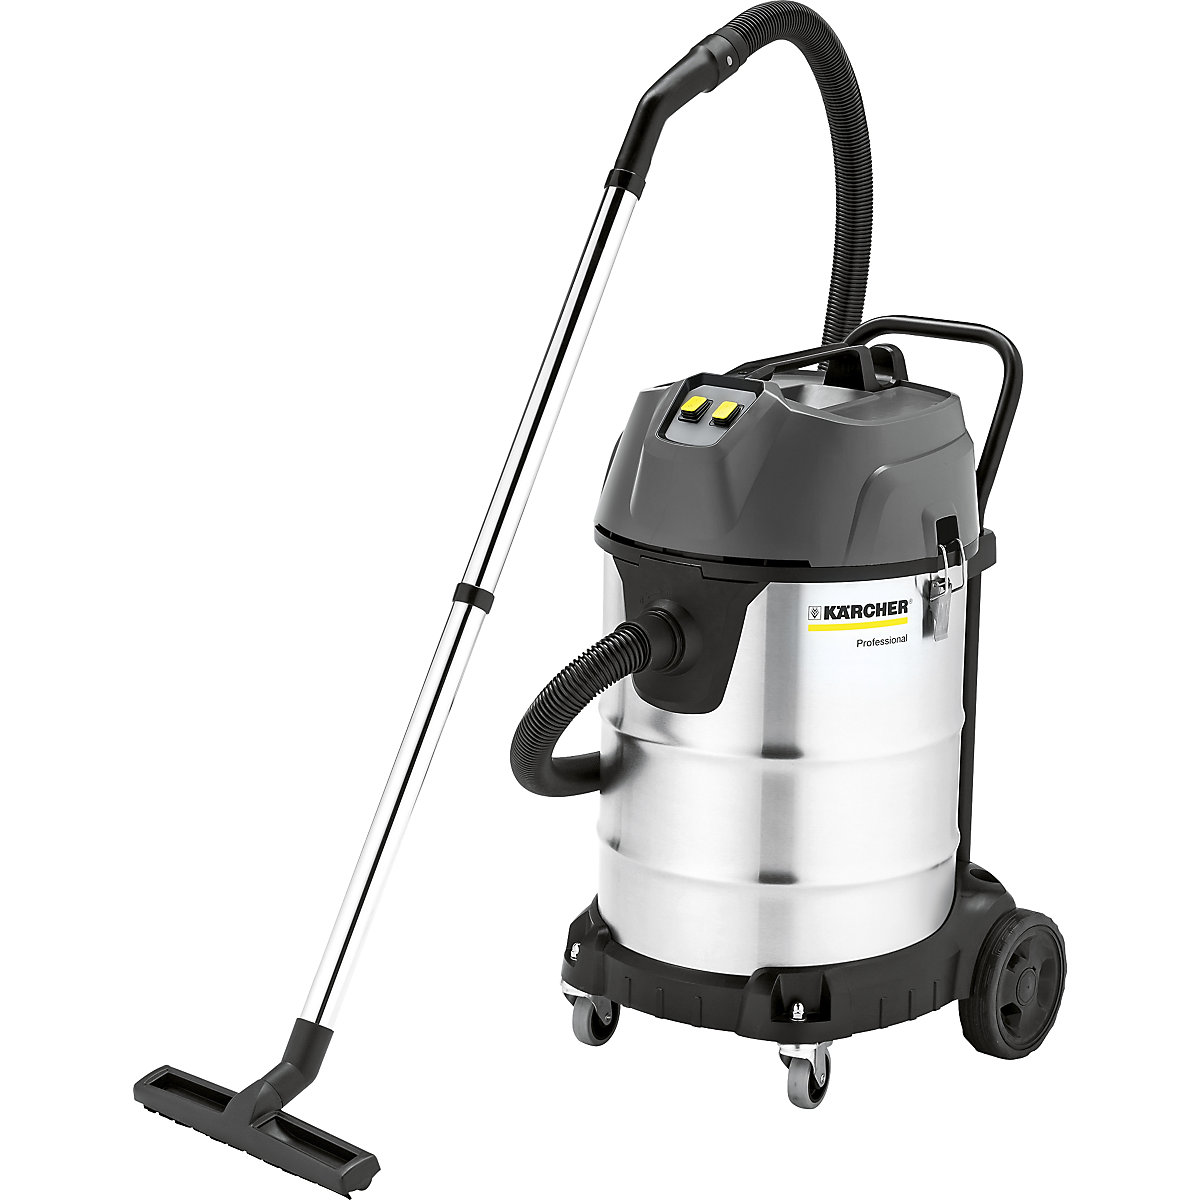 NT 70/2 Me Classic wet and dry vacuum cleaner - Kärcher